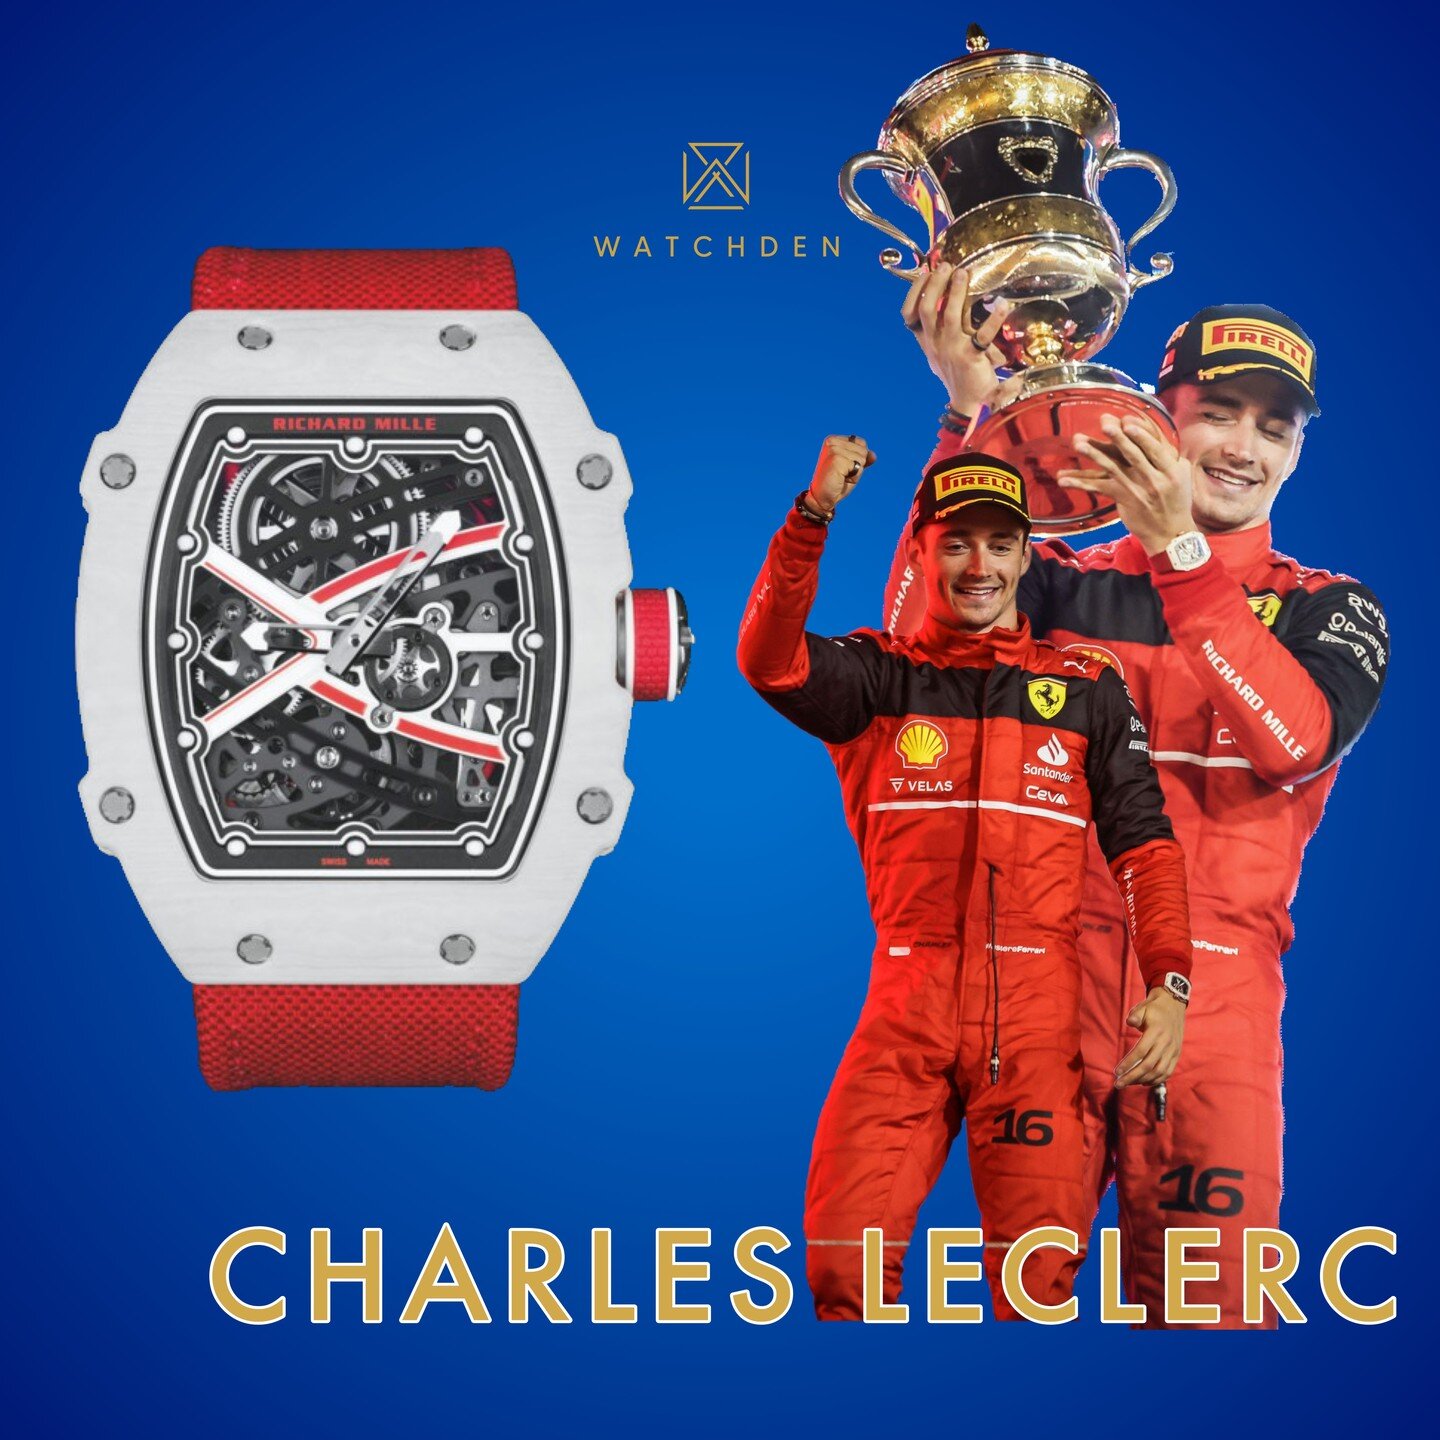 Charles Leclerc, Formula One driver for Scuderia Ferrari, was spotted wearing a Richard Mille RM 67-02 Automatic &lsquo;Charles Leclerc&rsquo; in red and white Quartz TPT&reg;. Leclerc attracted Richard Mille&rsquo;s &ldquo;attention and enthusiasm&r